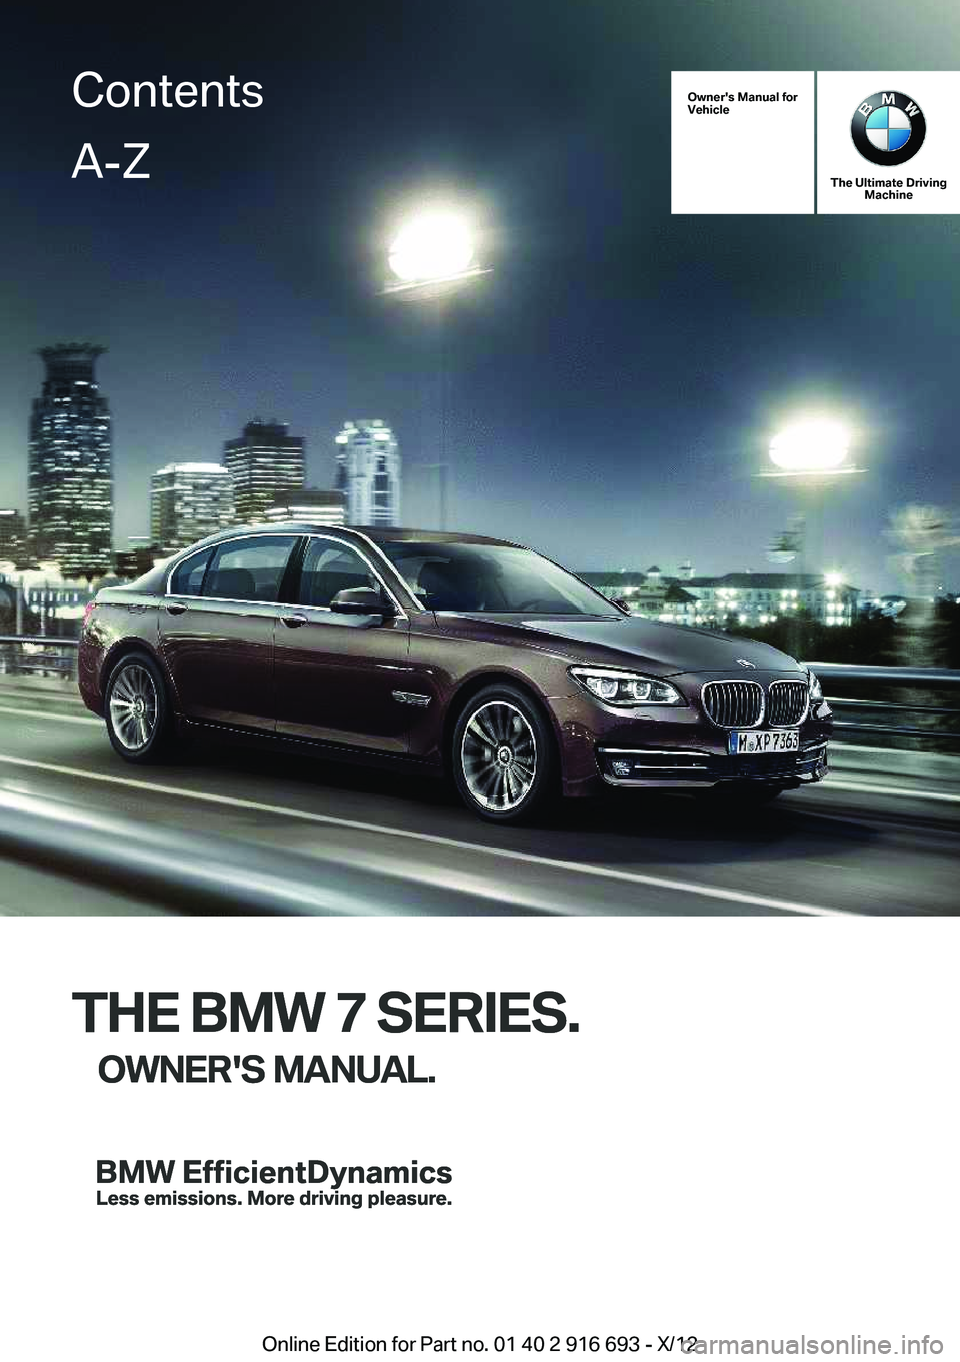 BMW 750I XDRIVE 2013  Owners Manual Owner's Manual for
Vehicle
THE BMW 7 SERIES.
OWNER'S MANUAL.
The Ultimate Driving Machine
THE BMW 7 SERIES.
OWNER'S MANUAL.
ContentsA-Z
Online Edition for Part no. 01 40 2 916 693 - X/12  